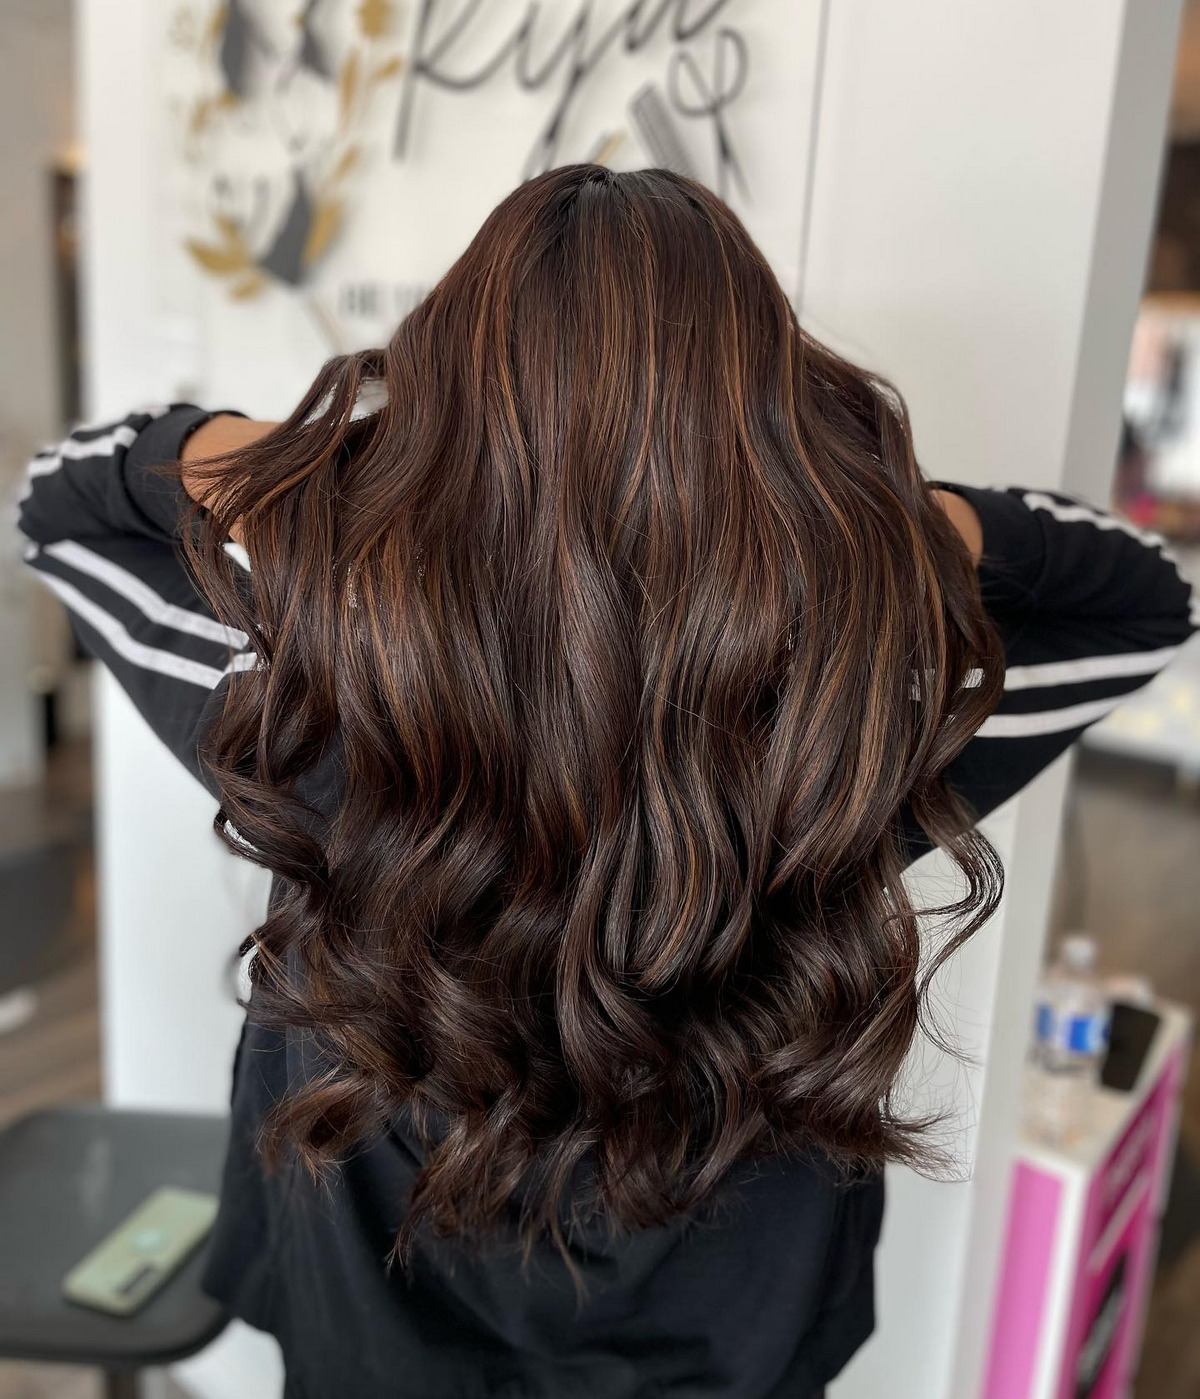 Warm Brown Highlights On Long Layers Hair